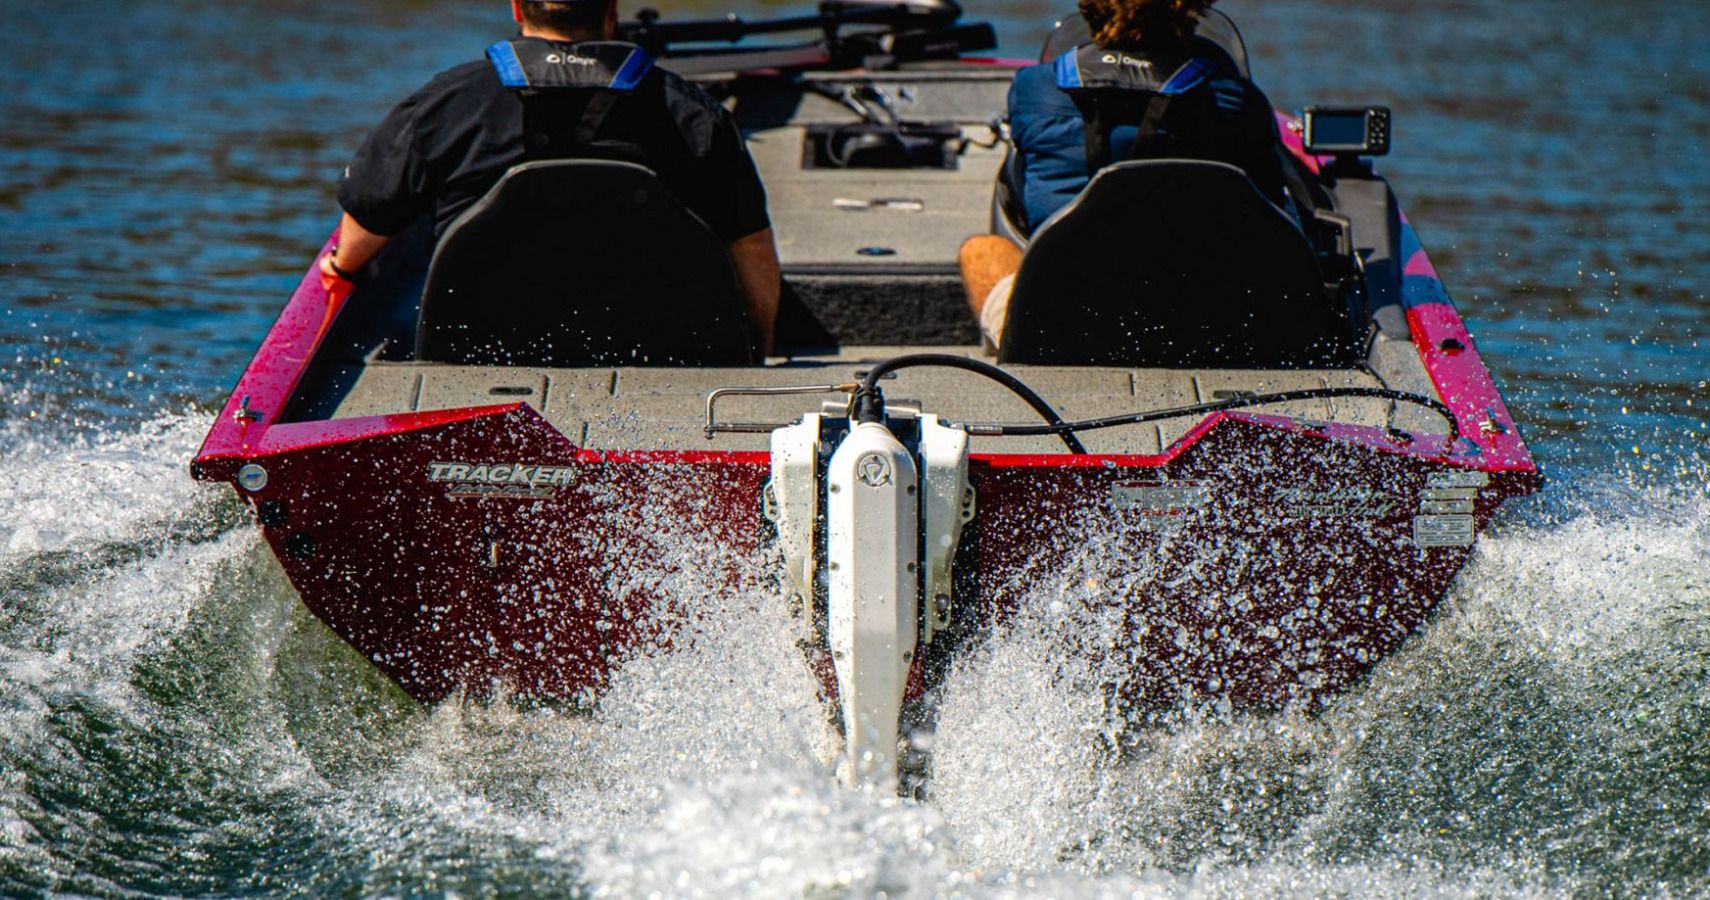 One of the Electric Outboard Motors from Pure Watercraft.